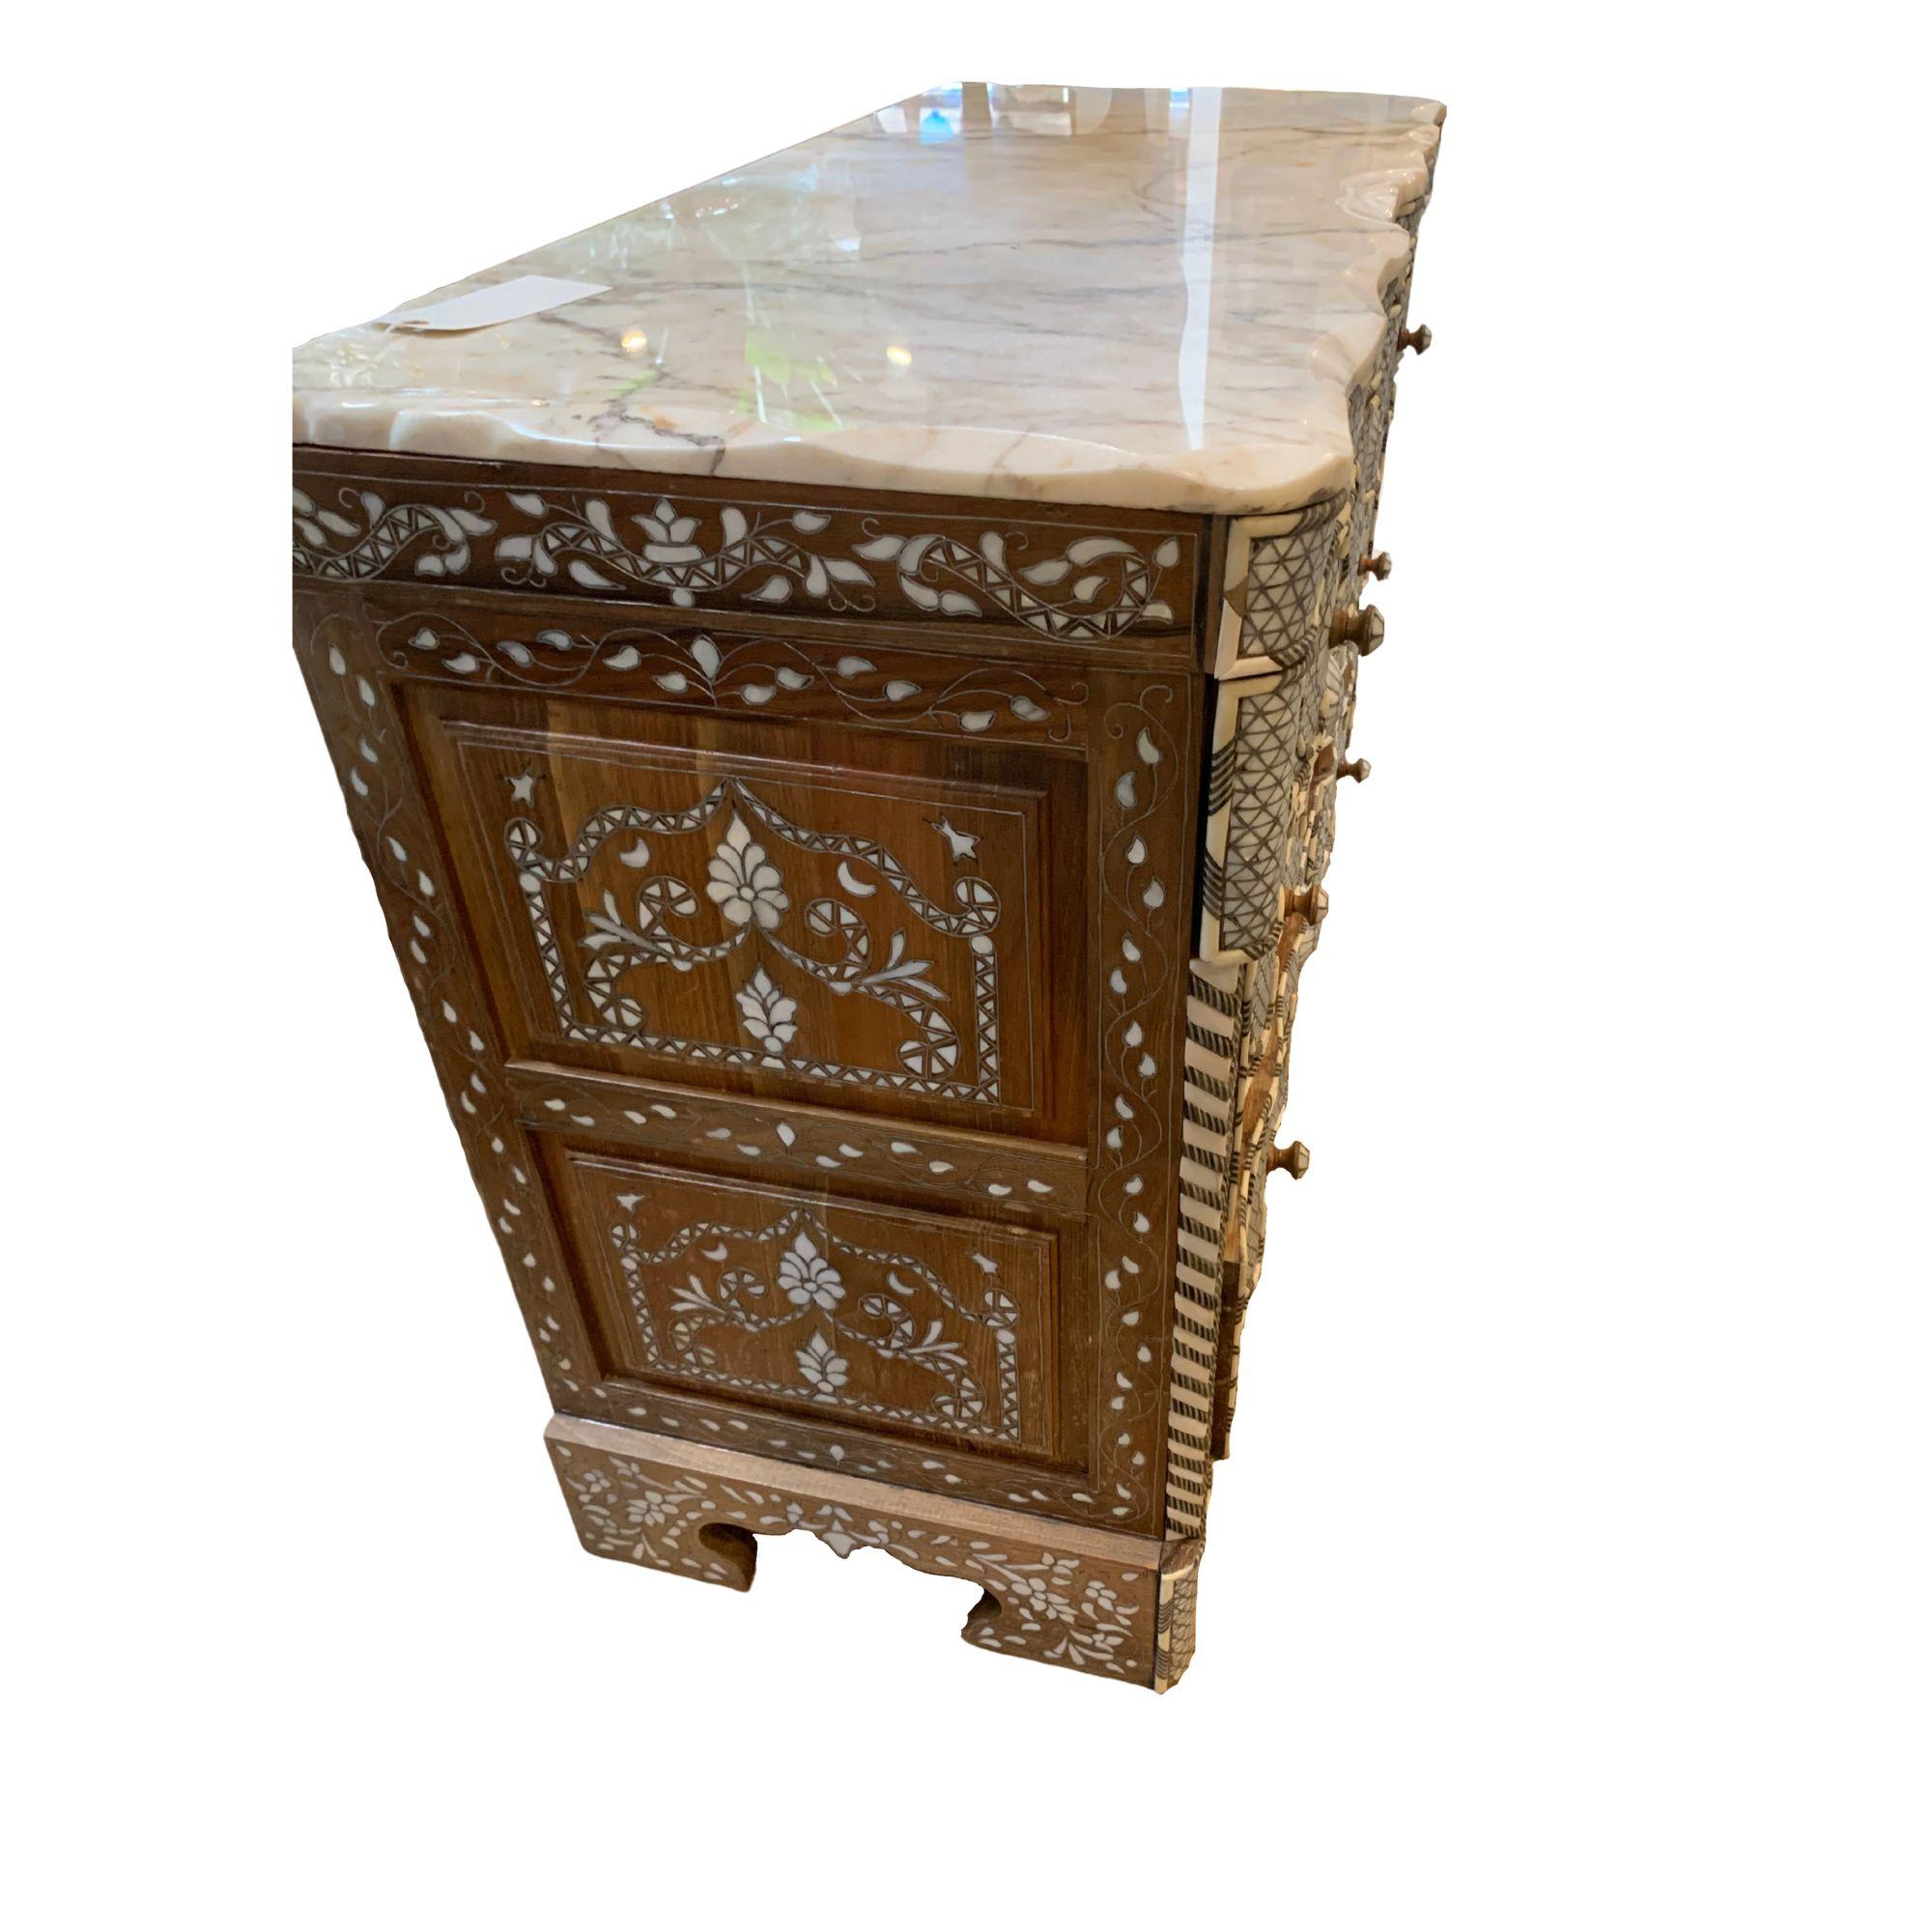 Syrian chest of drawers featuring mother of pearl inlay and topped with marble.